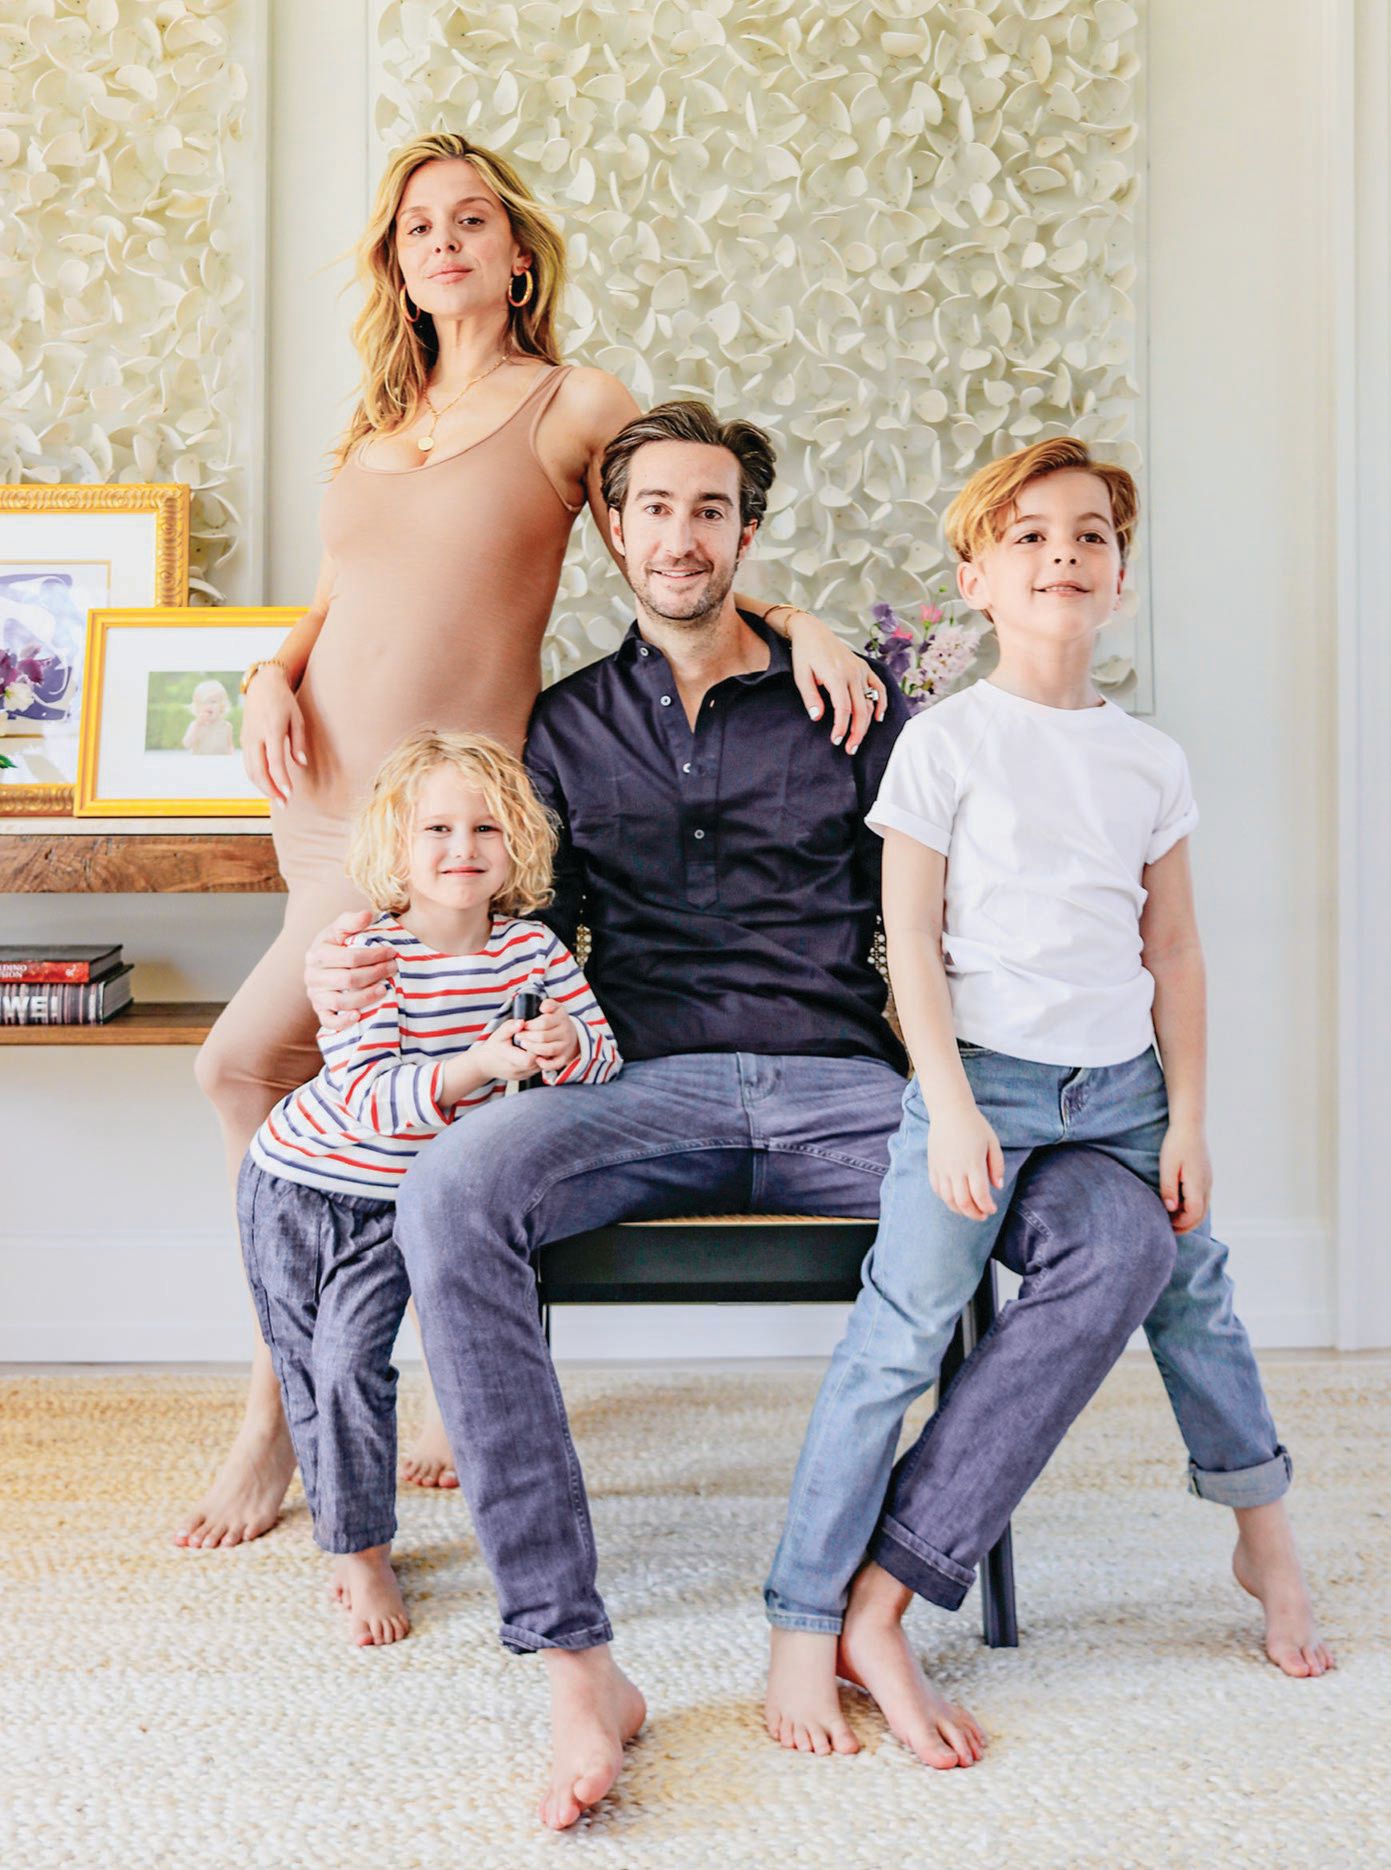 Anastasia Ganias-Gellin with her husband, Hunter, and two kids PHOTO BY: MOLLY TAVOLETTI